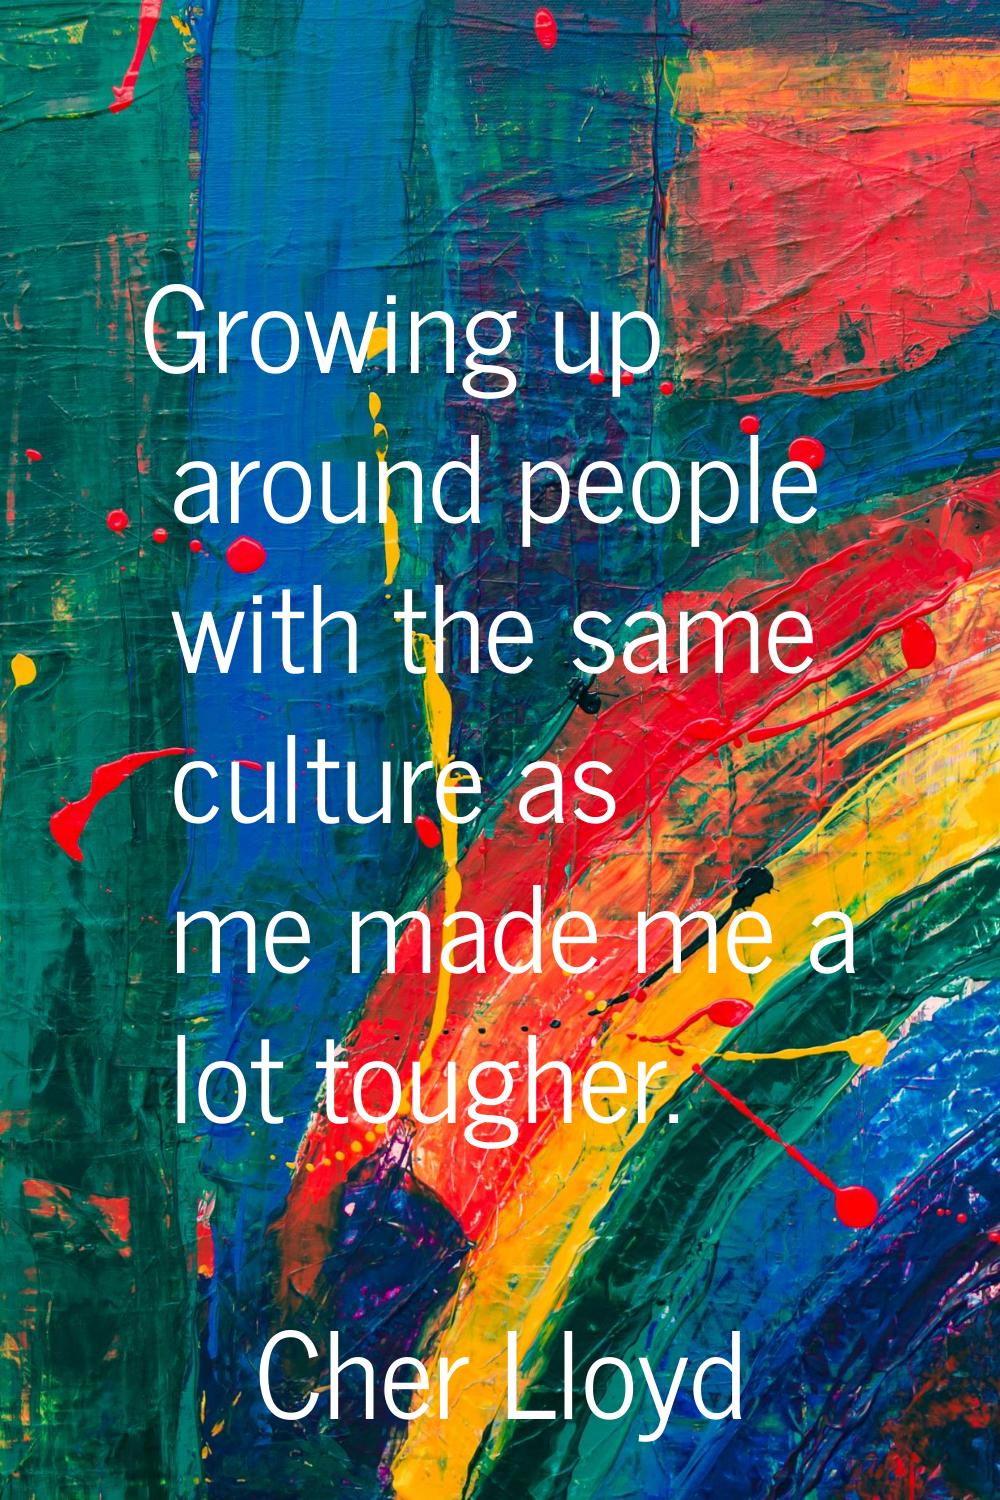 Growing up around people with the same culture as me made me a lot tougher.